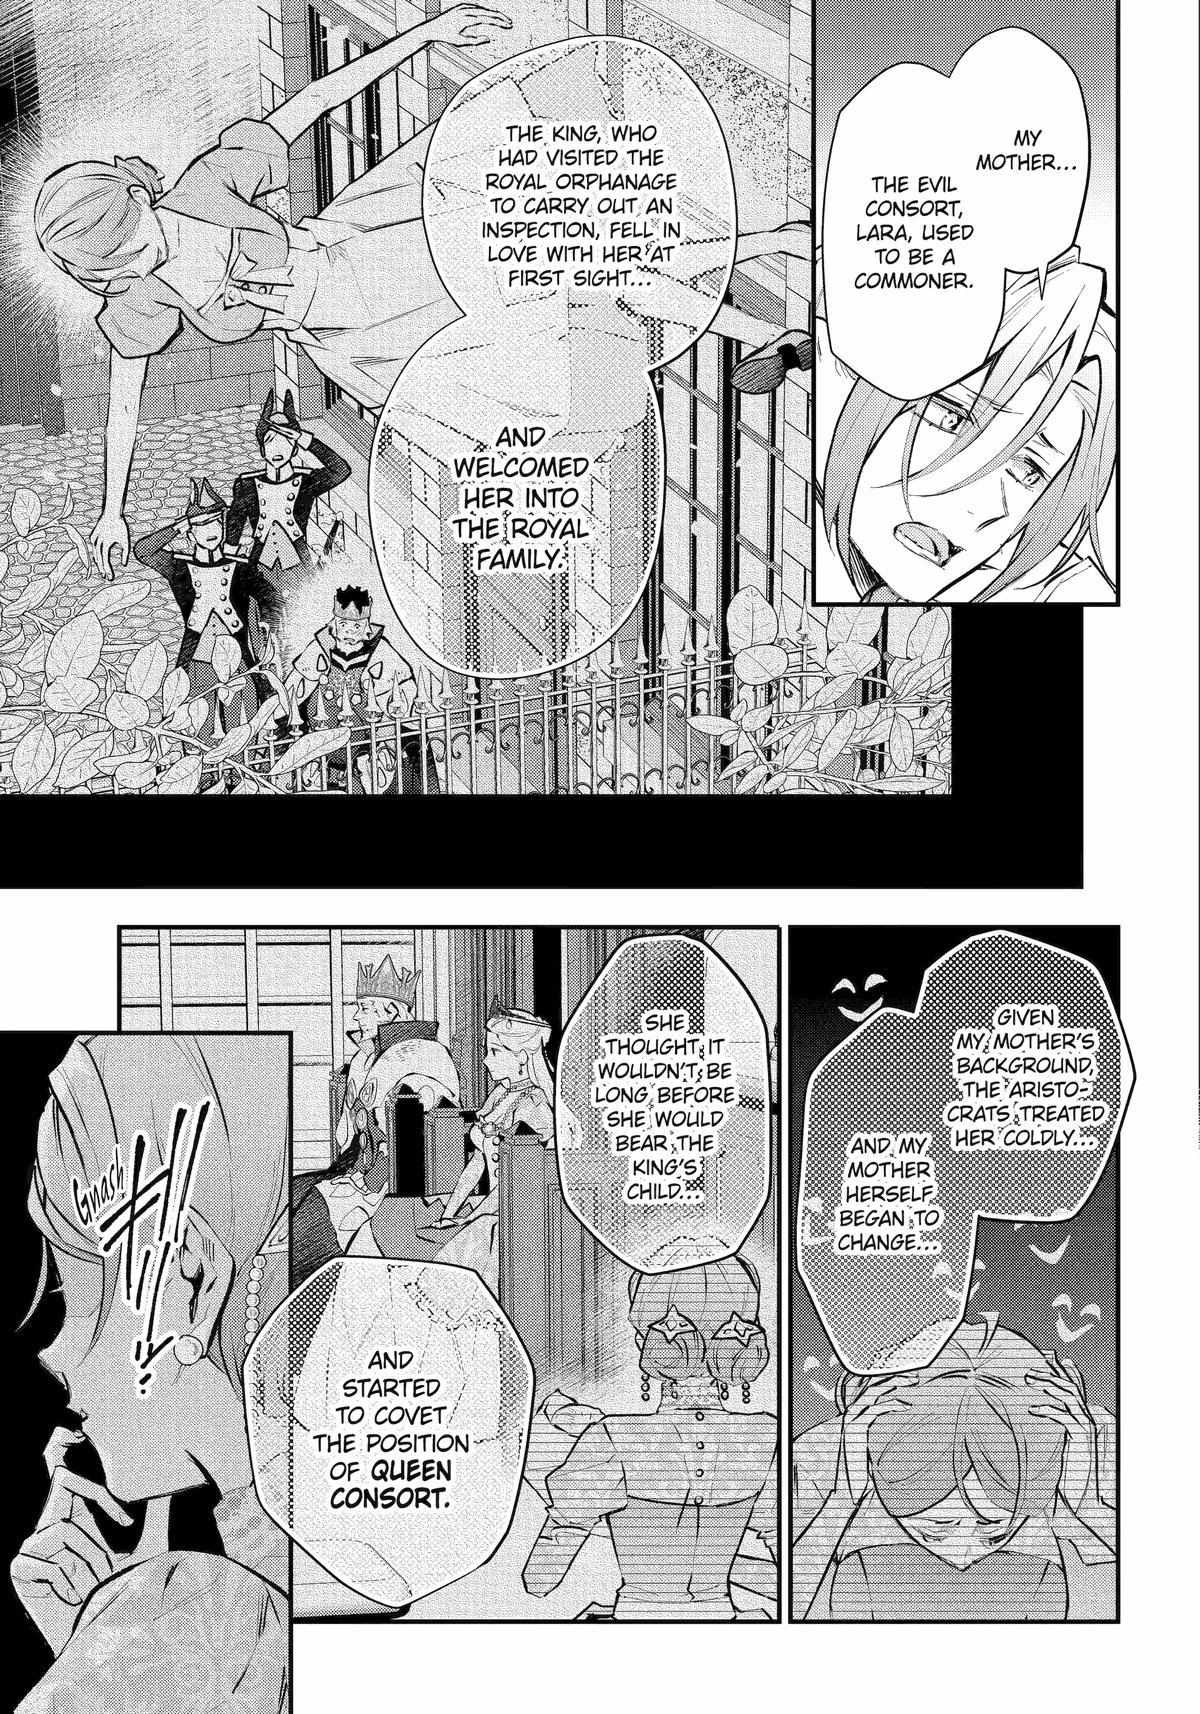 Tales Of Reincarnation In Maydare - The World's Worst Witch - 42 page 7-430530d7